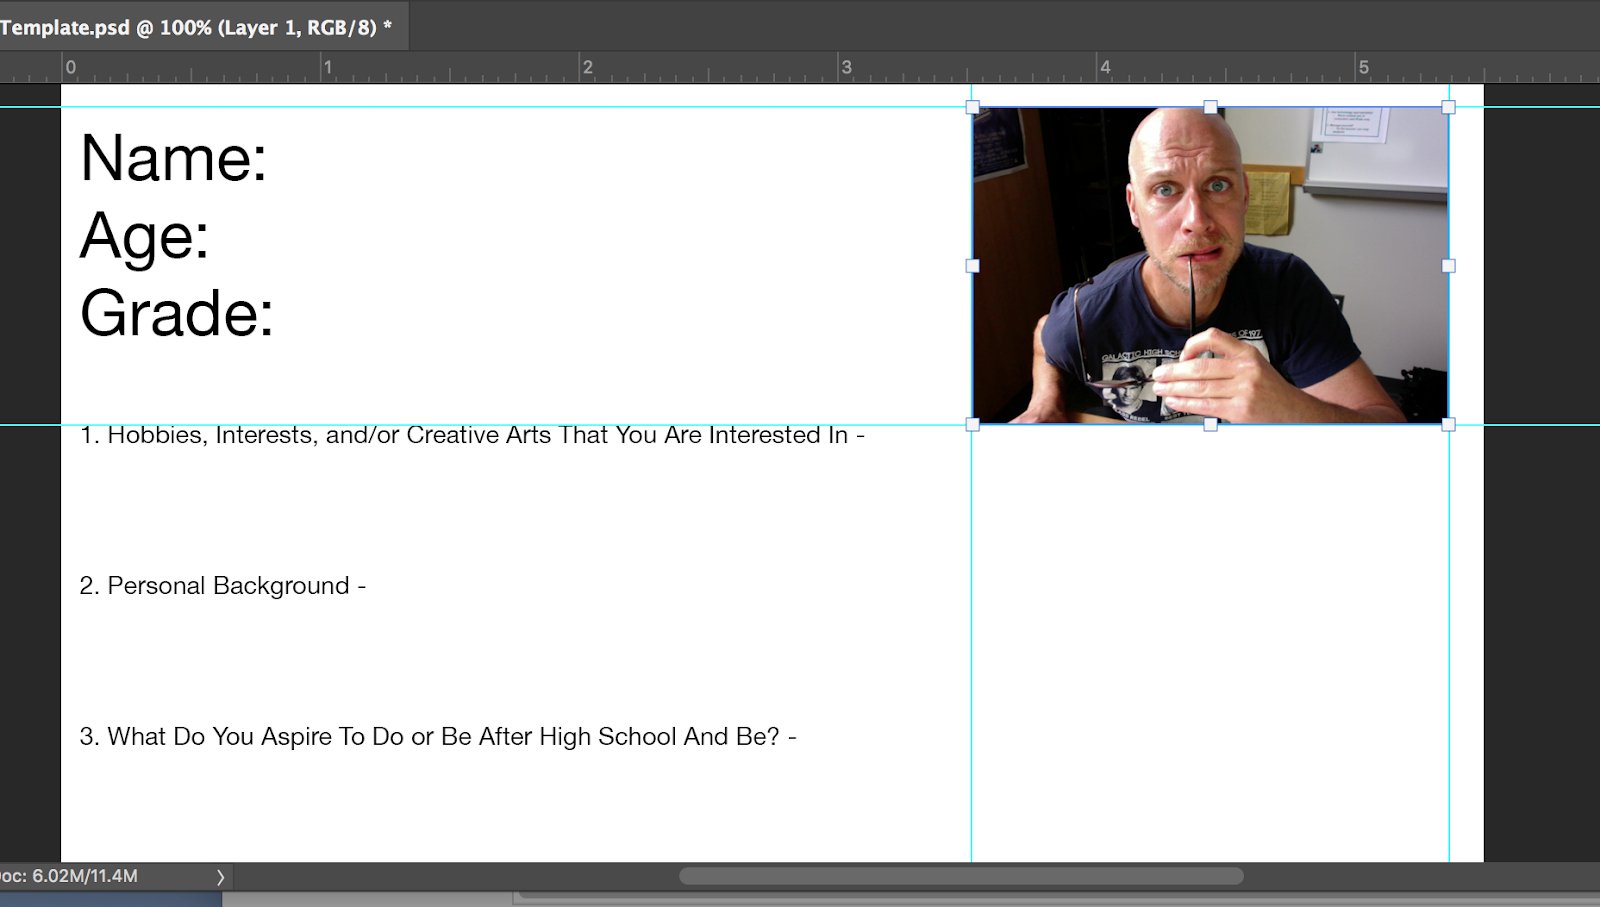 Working With Layers In Photoshop Cc To Build Your Punkt Id Card Pertaining To High School Id Card Template